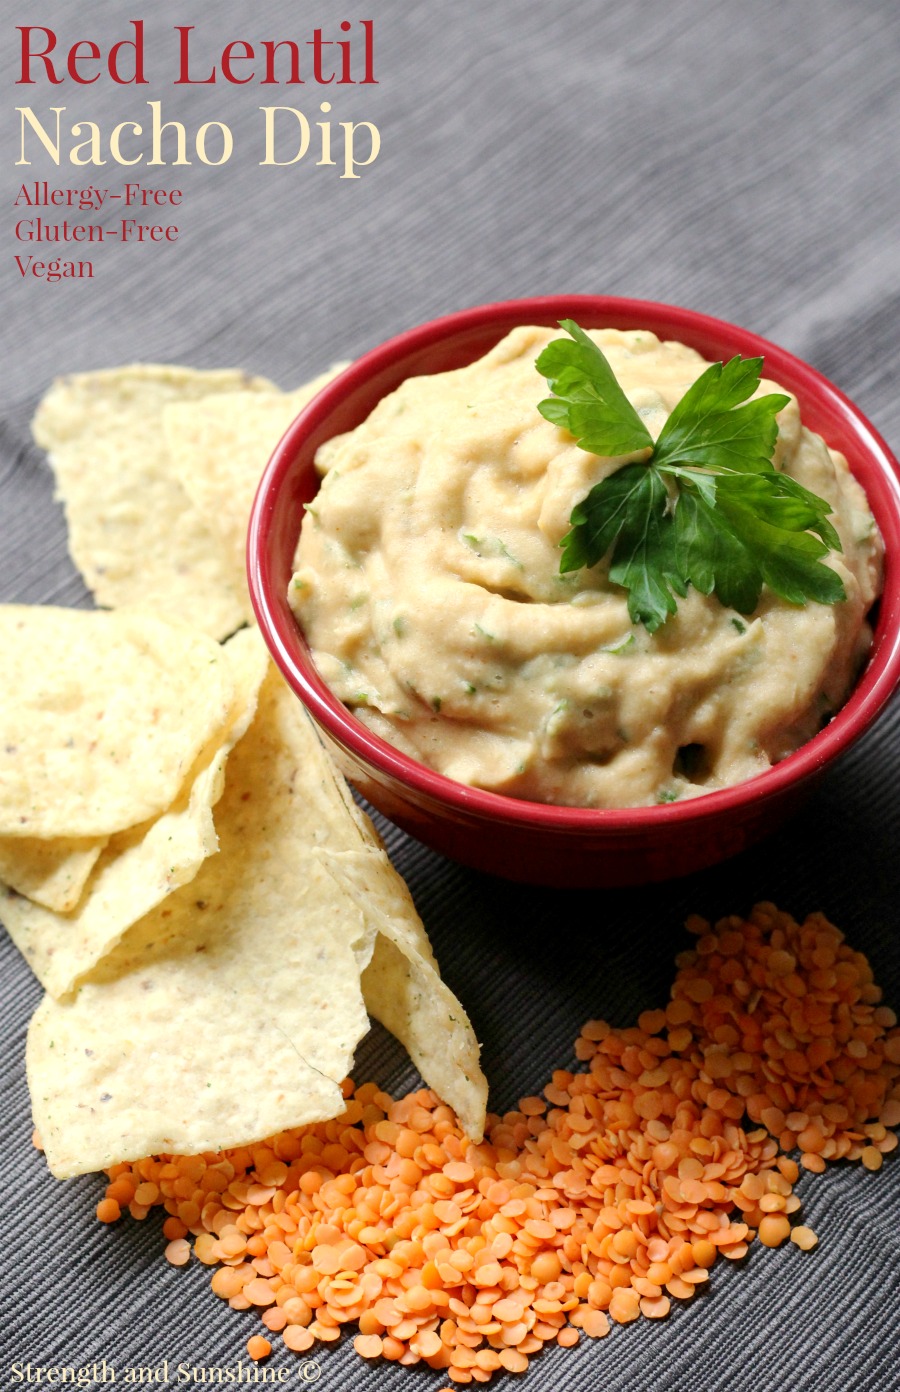 Red Lentil Nacho Dip (Gluten-Free, Vegan) | Strength and Sunshine @RebeccaGF666 Your favorite Mexican appetizer, now as a dip! A creamy Red Lentil Nacho Dip that's allergy-free, gluten-free, and vegan! A perfect recipe for parties or everyday snacking! Easy to make and delicious to eat! 